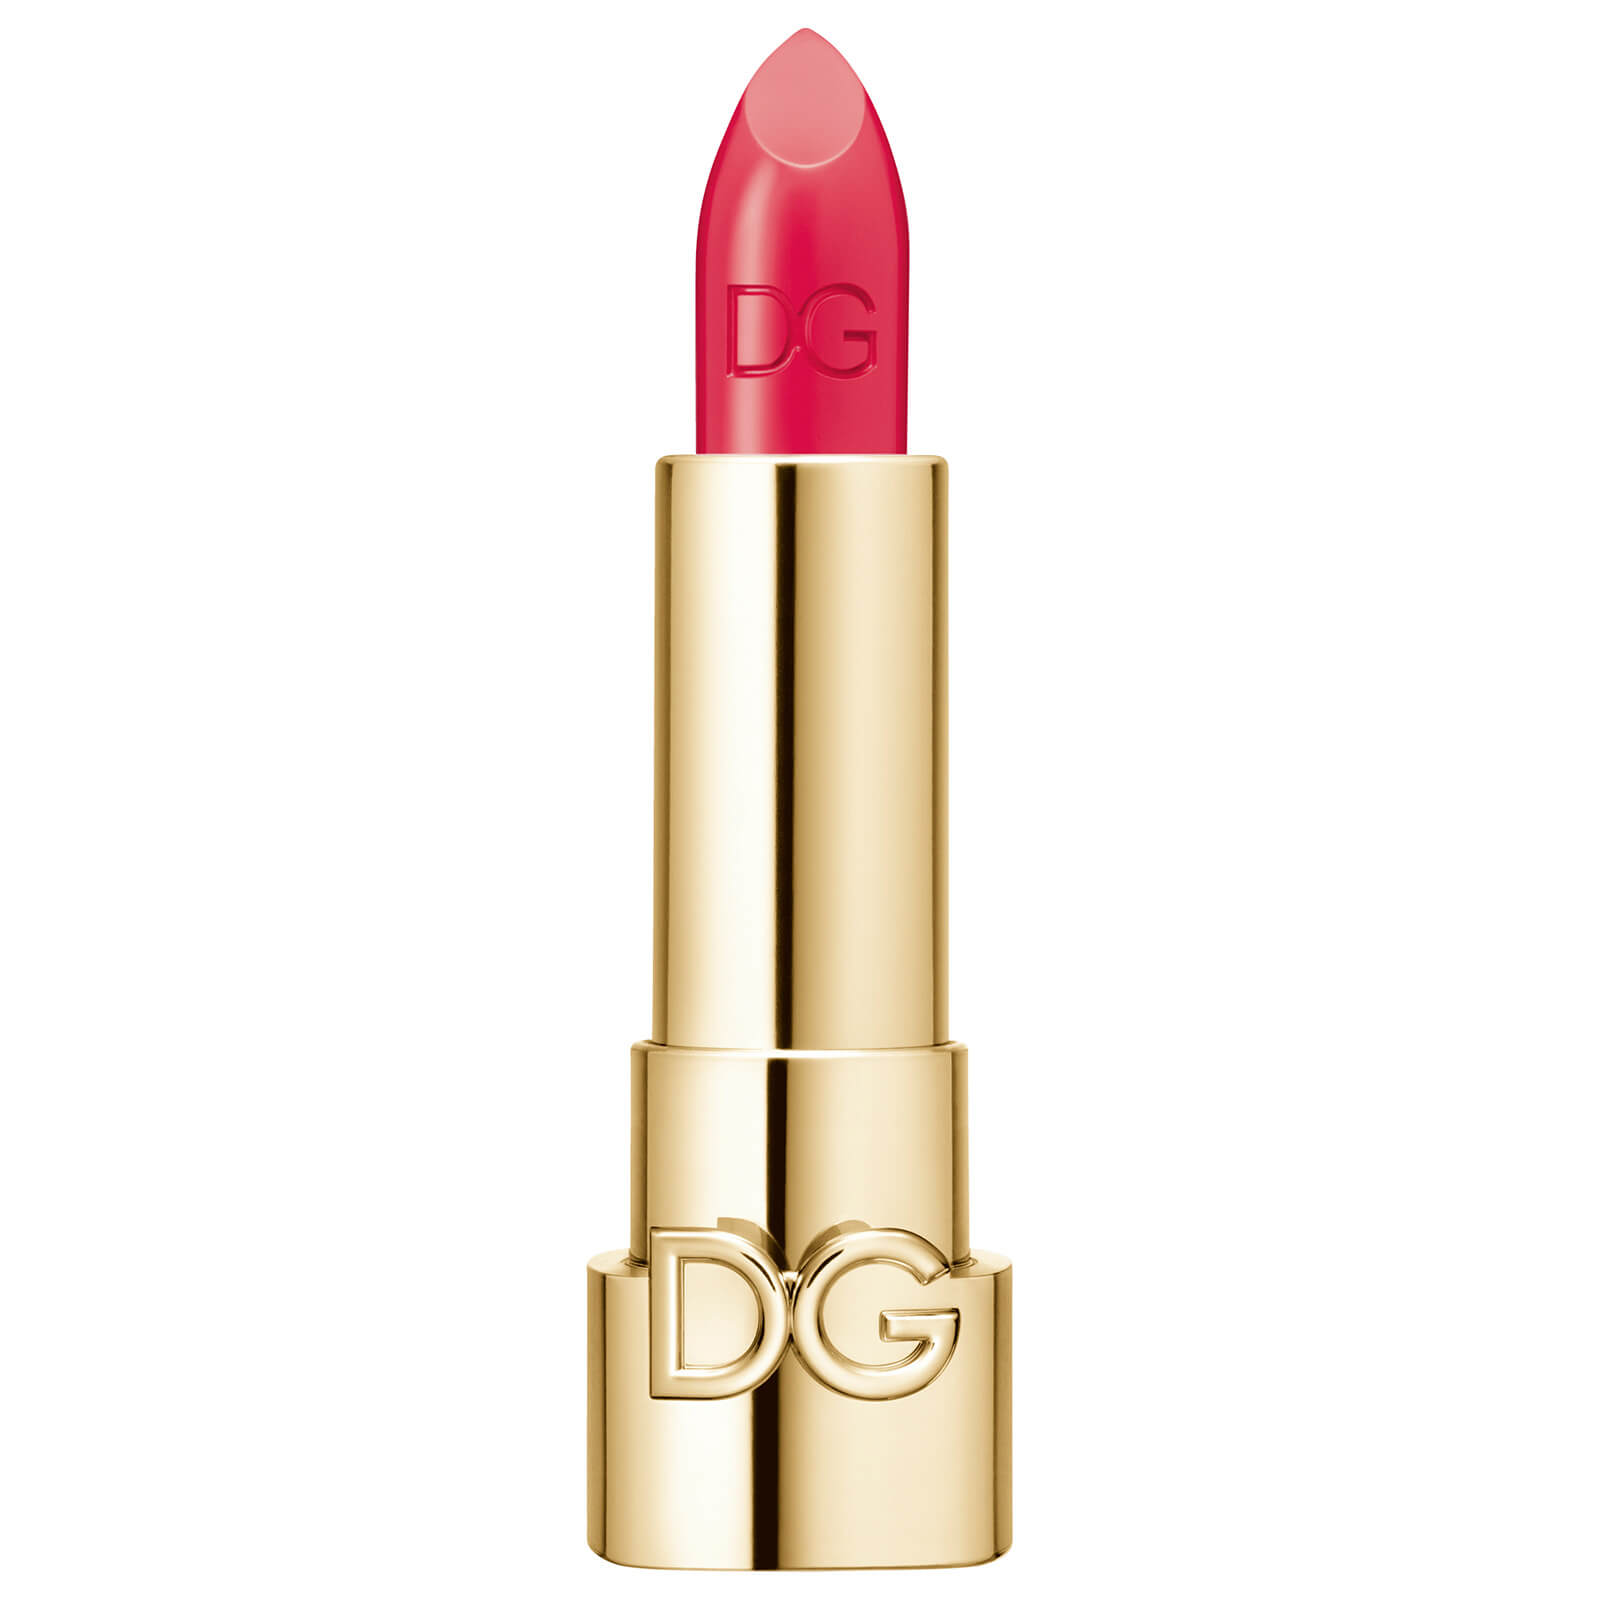 Dolce&Gabbana The Only One Lipstick 1.7g (No Cap) (Various Shades) - 260 Pink Lady